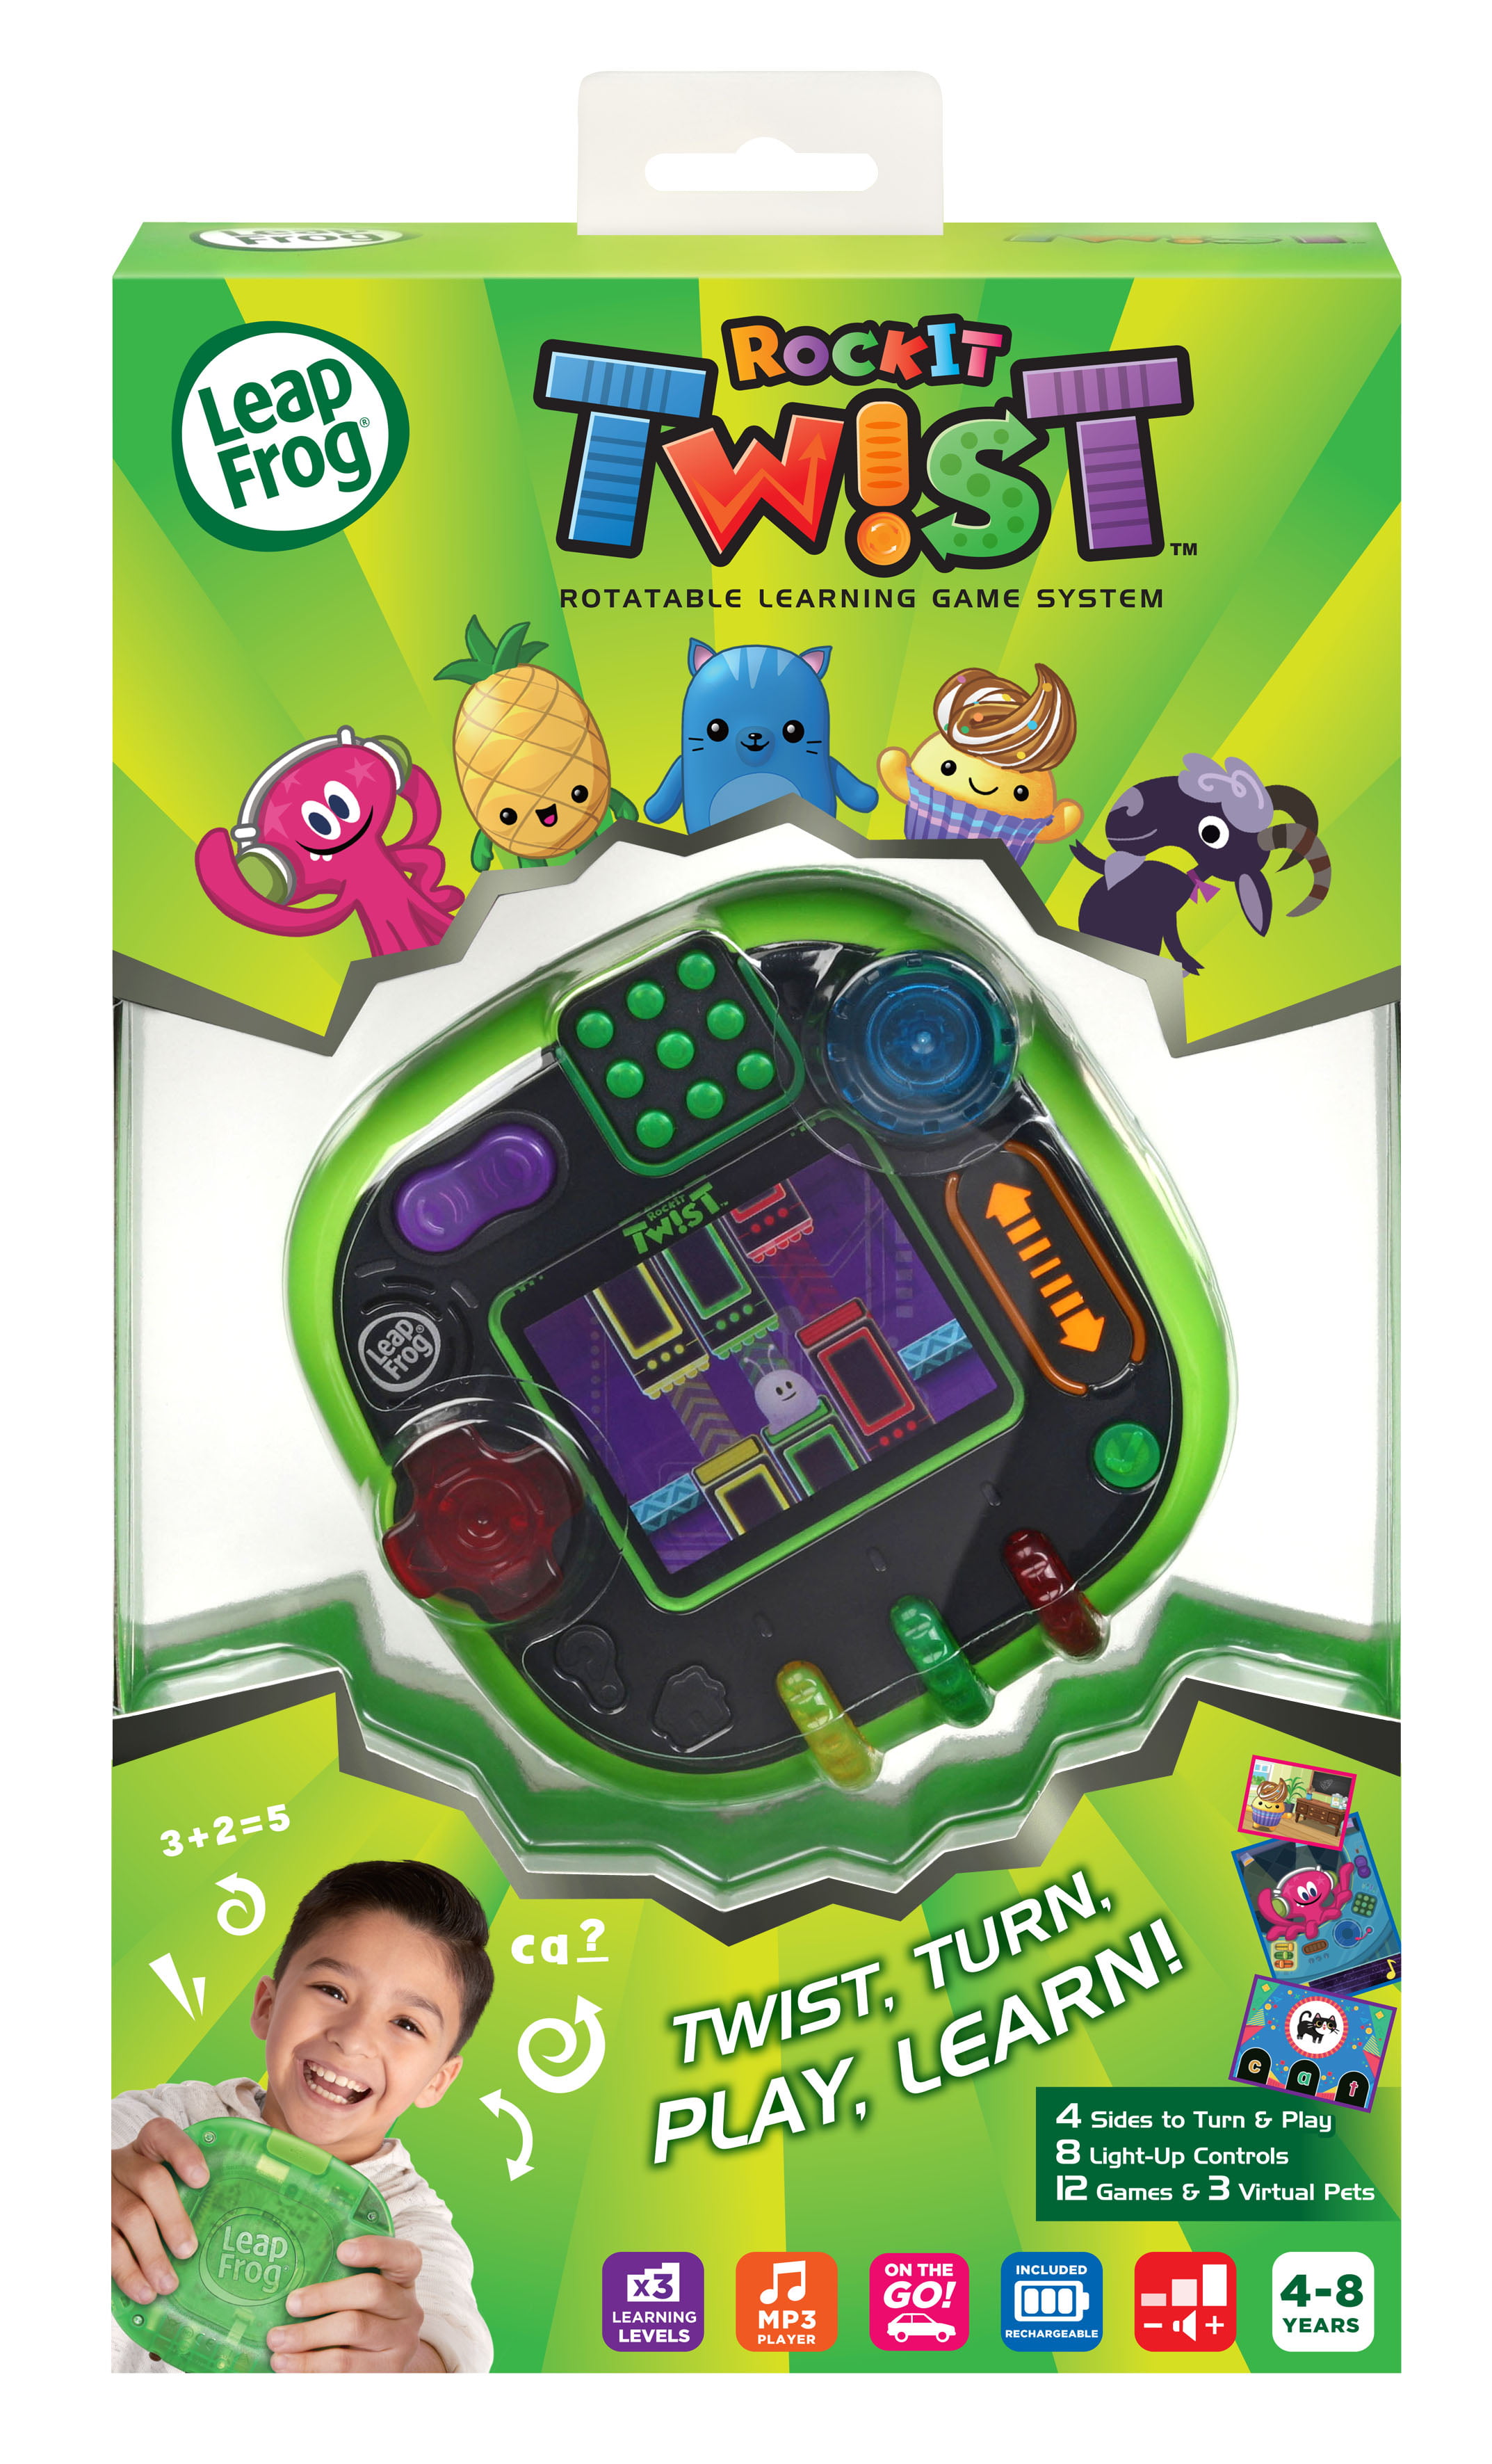 Leap Frog Rockit Twist Rotatable Learning Game System Green 